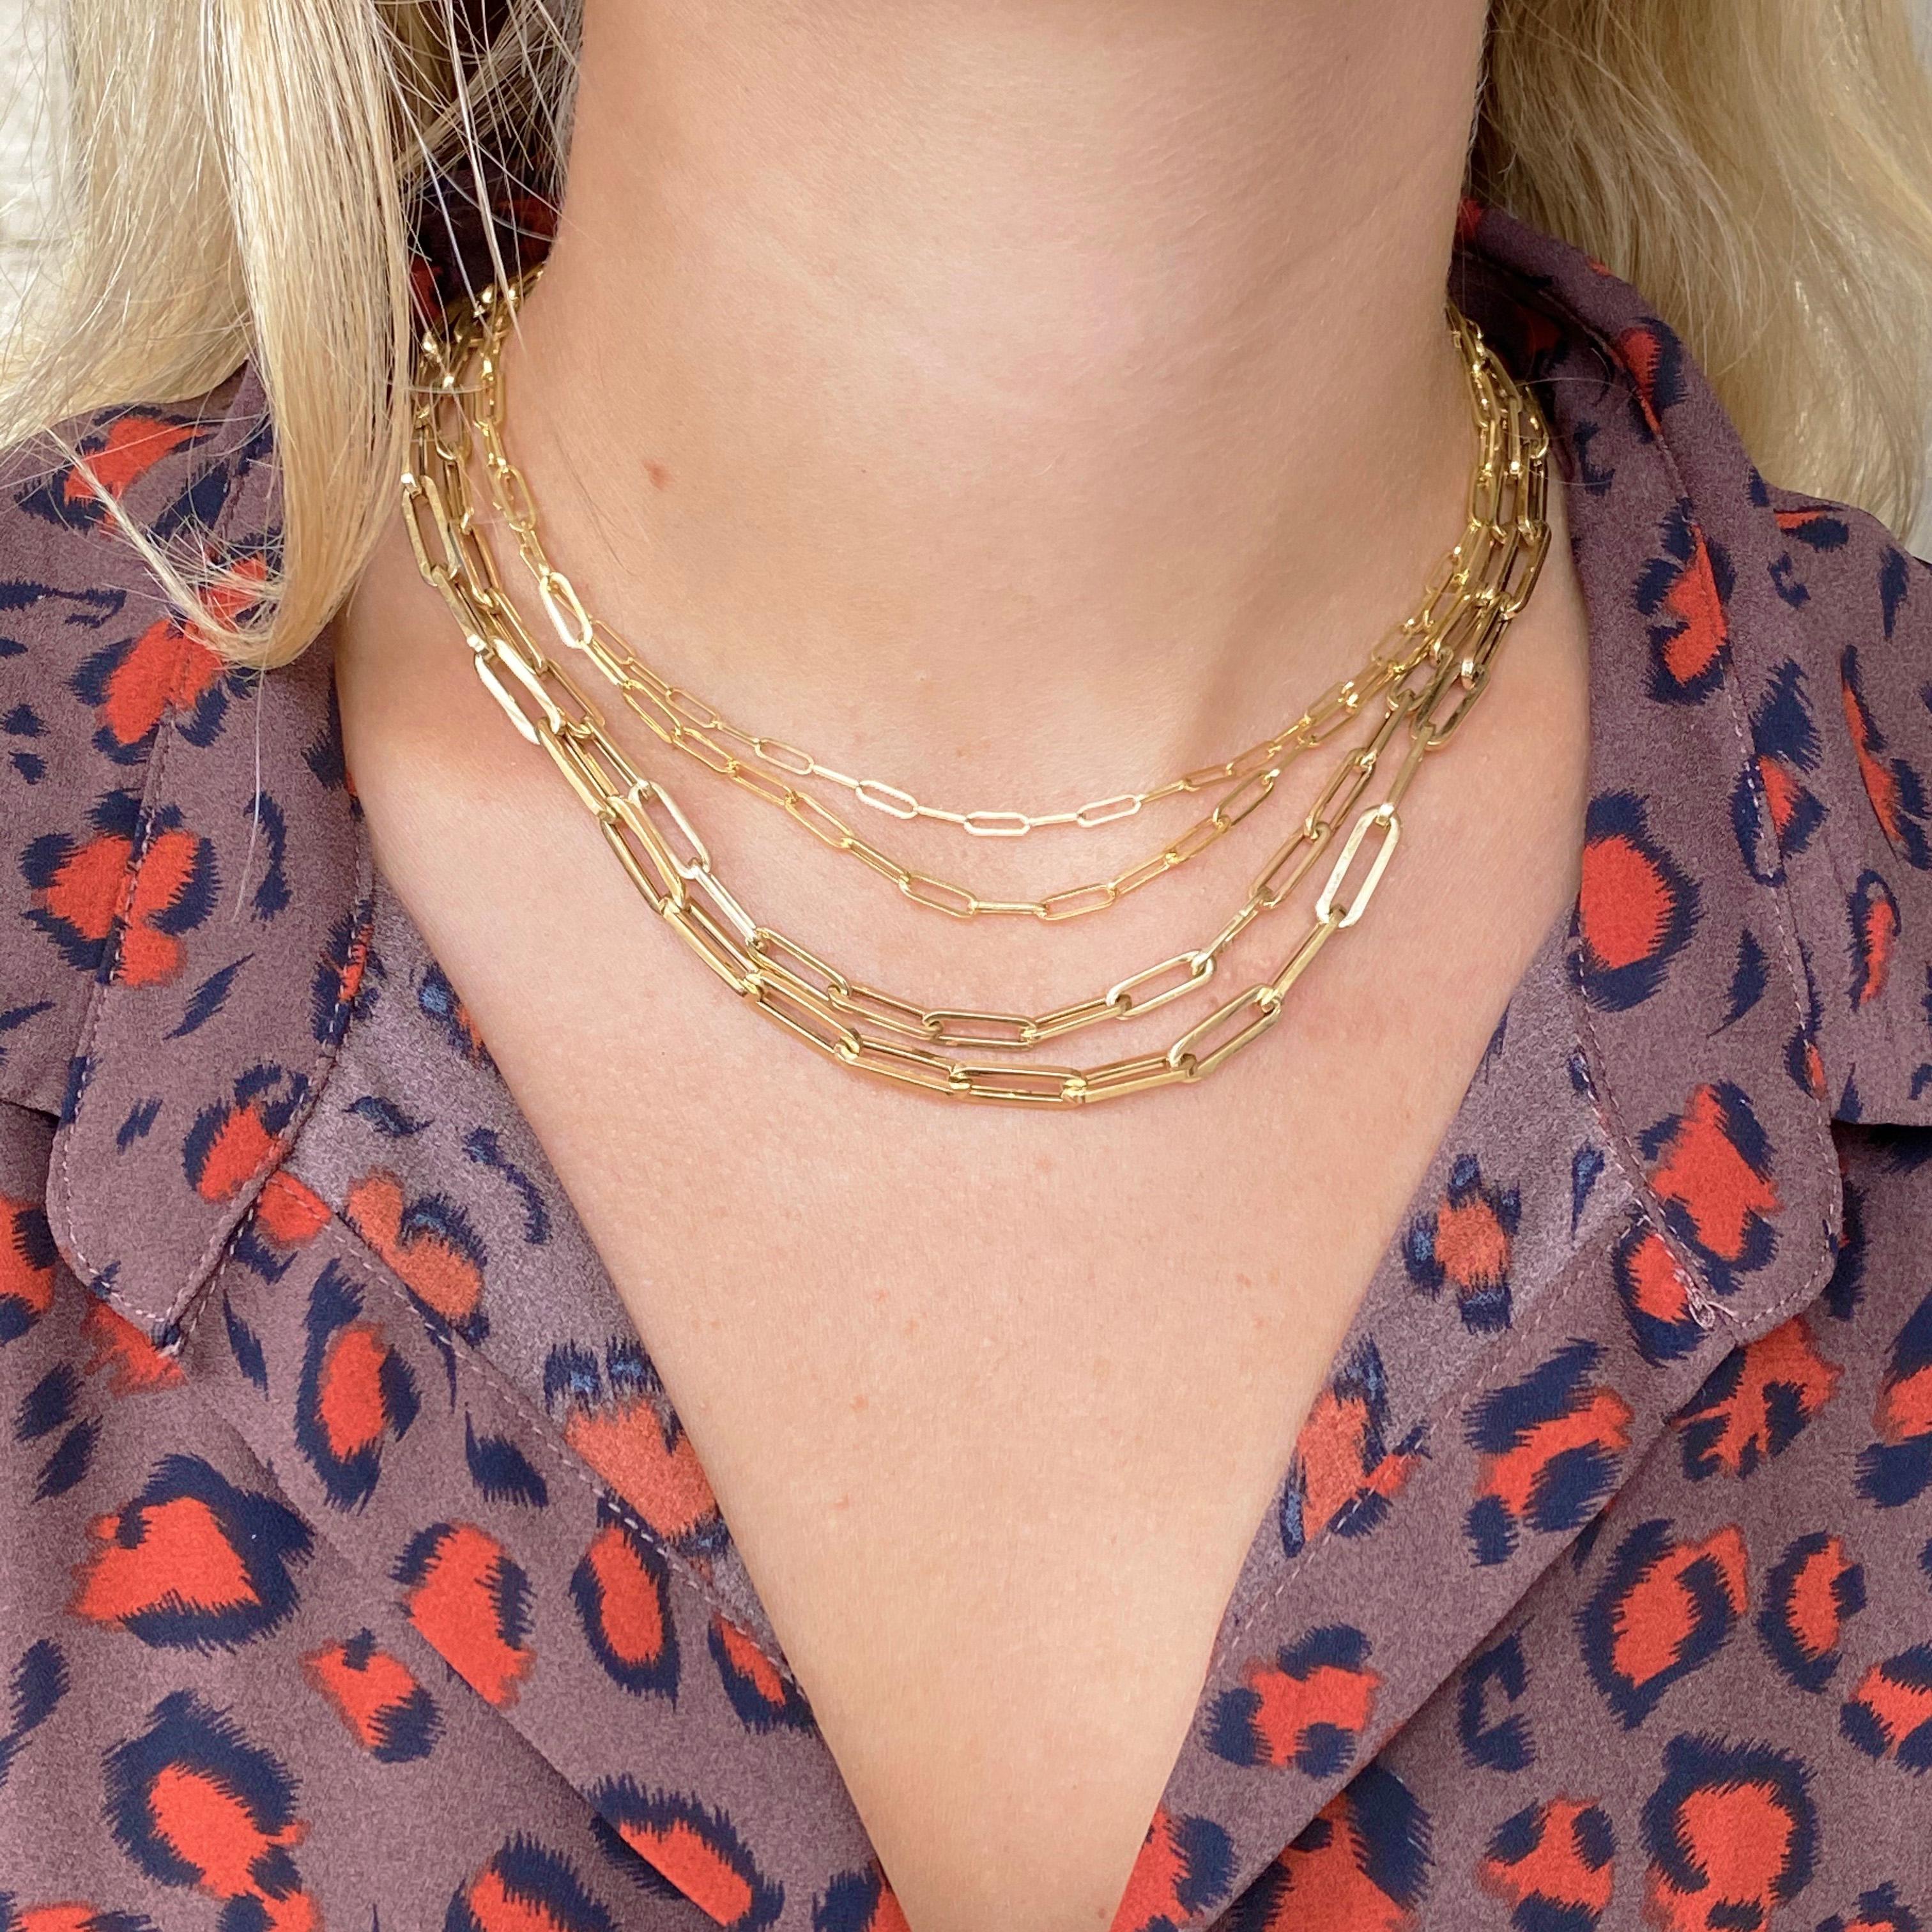 Paperclip chains are fabulous for anyone! Wear this 14 karat gold chain by itself, with a charm, or layer it with any chains you like for your own stylish and individual look!  This 24-inch chain is 2.5 mm wide.

To see if this fabulous chain is